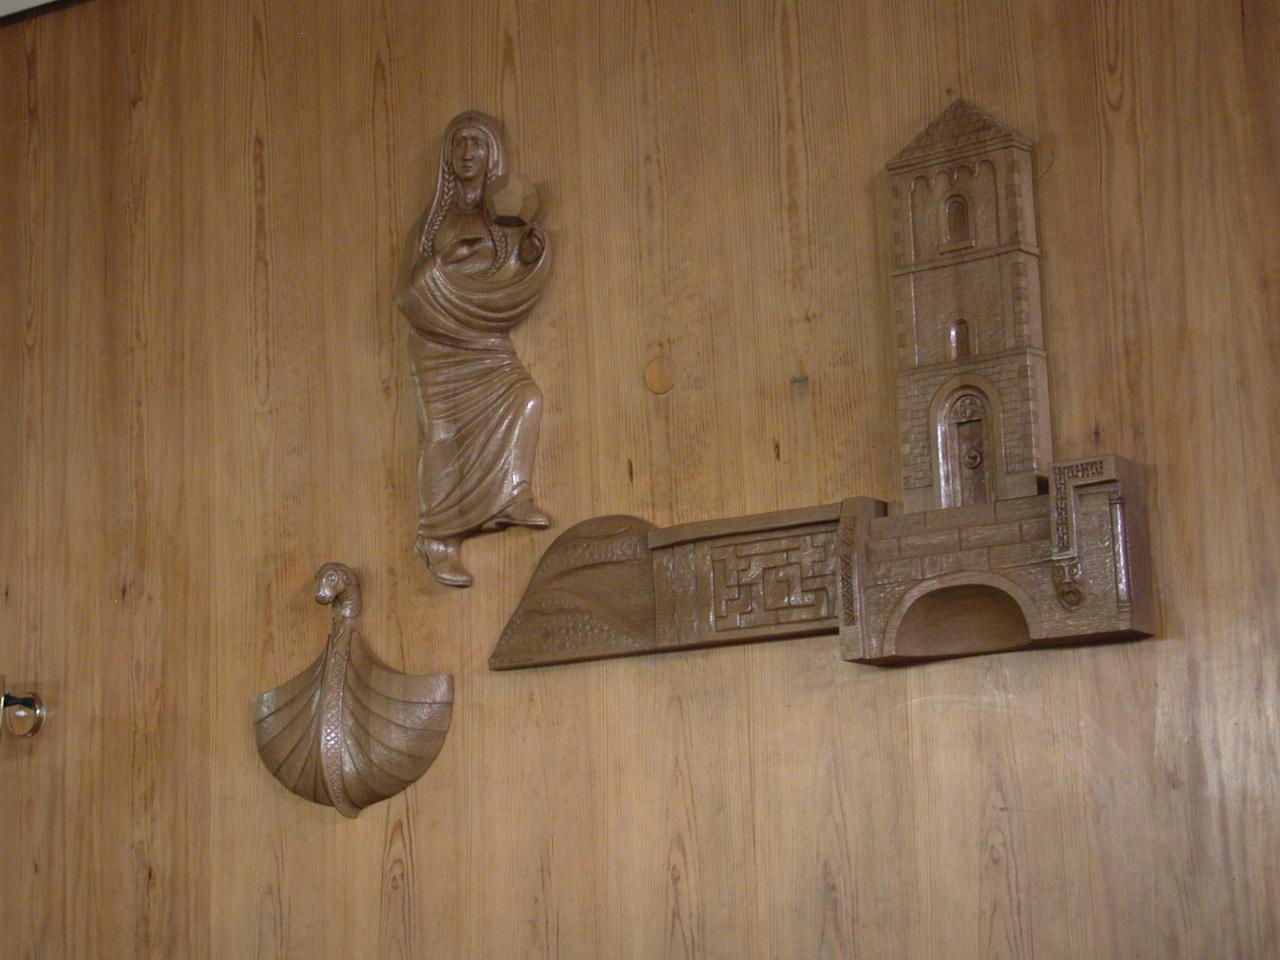 KPLU Viking Jazz: Inside Molde's Catholic Church - no hanging boat, but the nautical flavour is on this wall sculpture